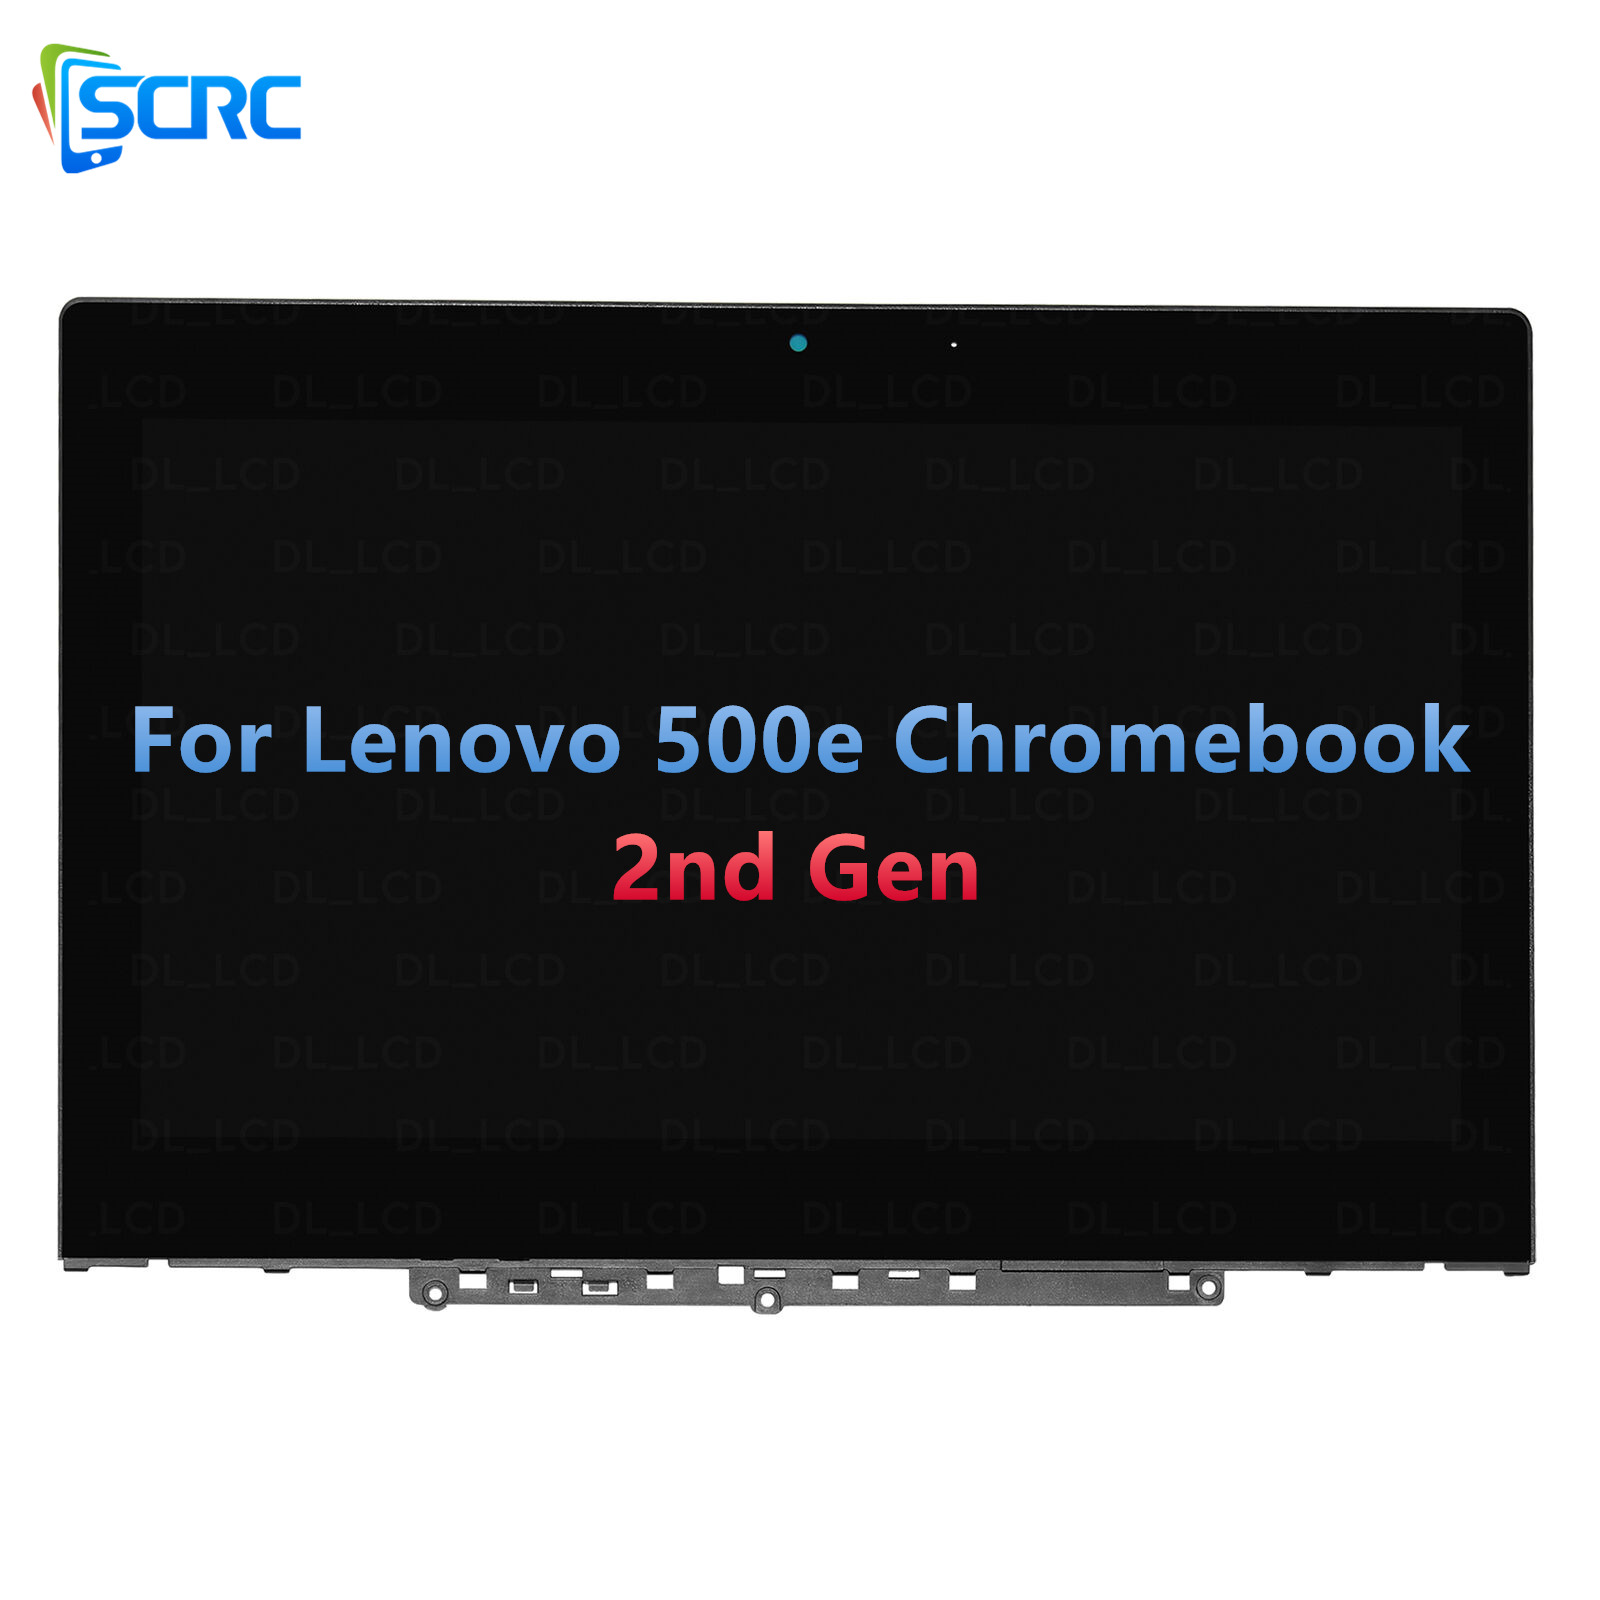 LCD Touch Screen Replacement For Lenovo 500e Chromebook 2nd Gen